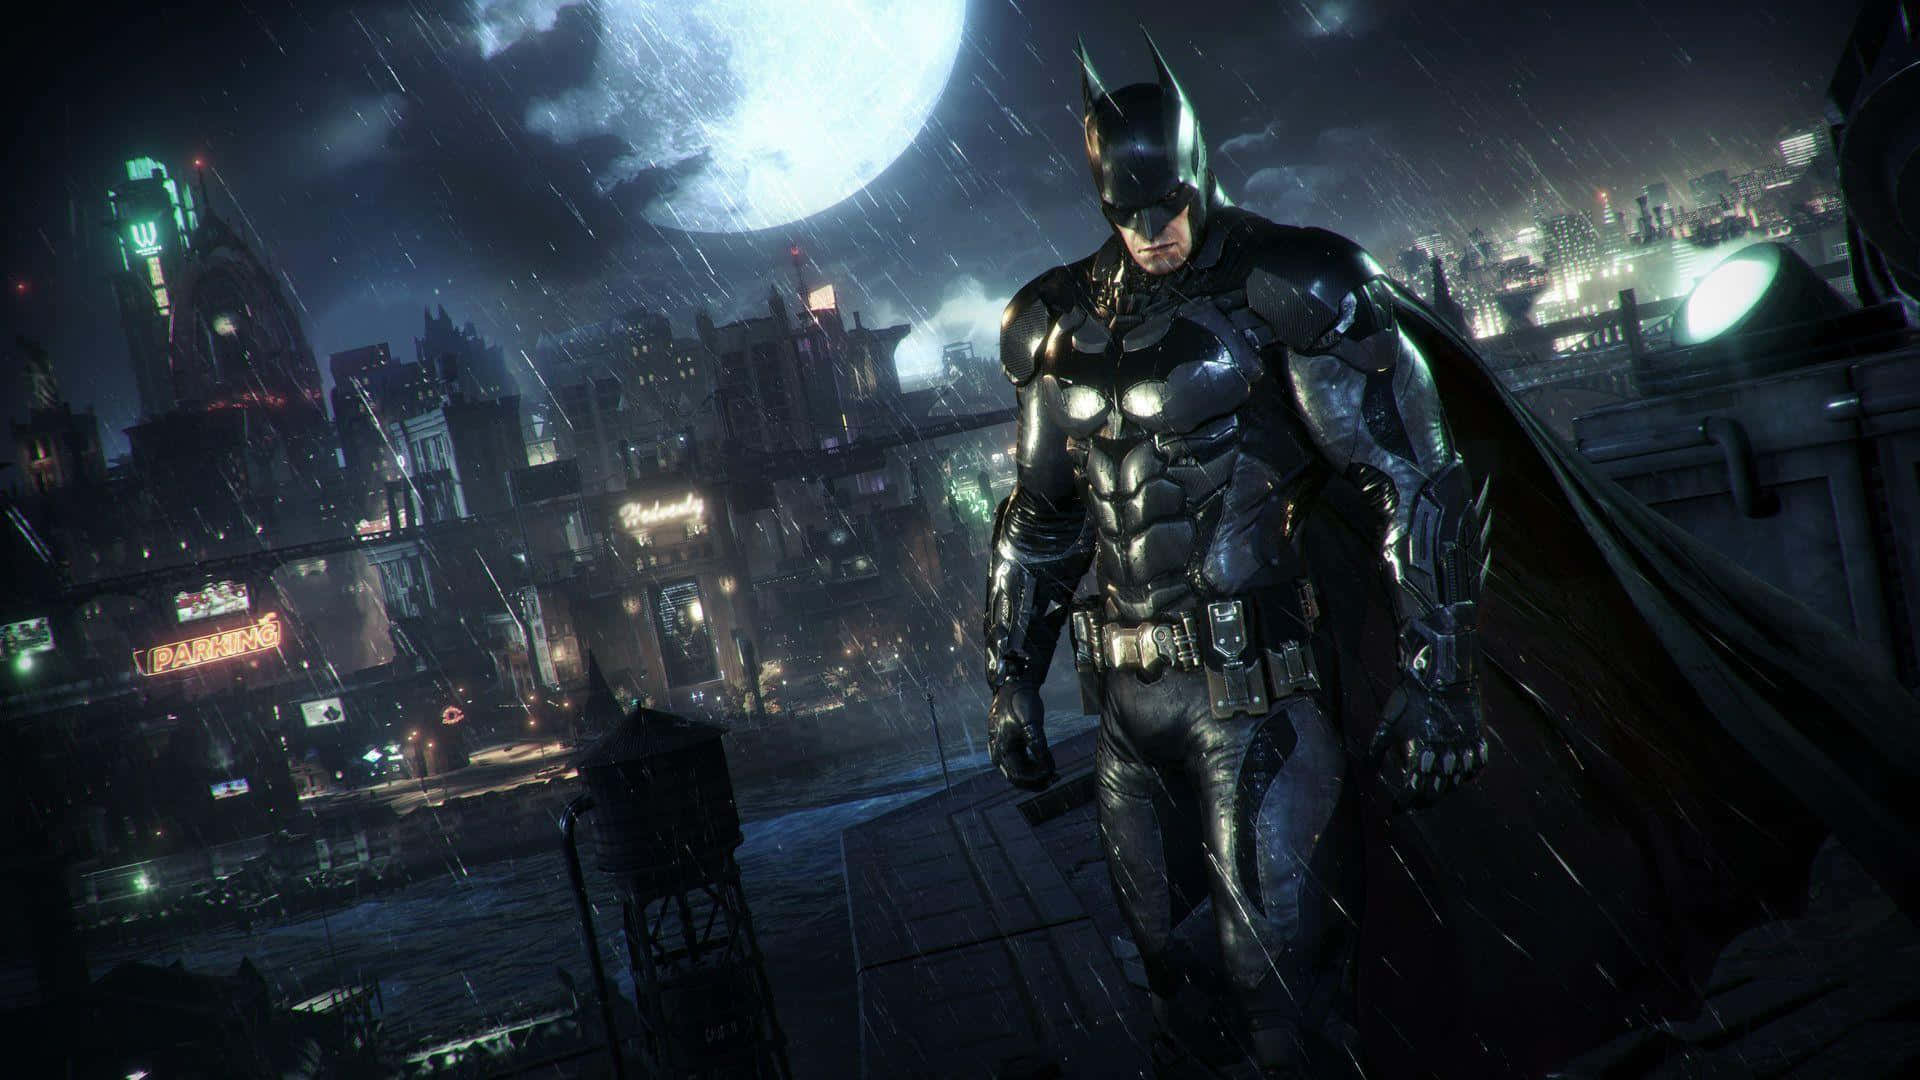 Launch into Action with "Arkham Knight 4k" Wallpaper